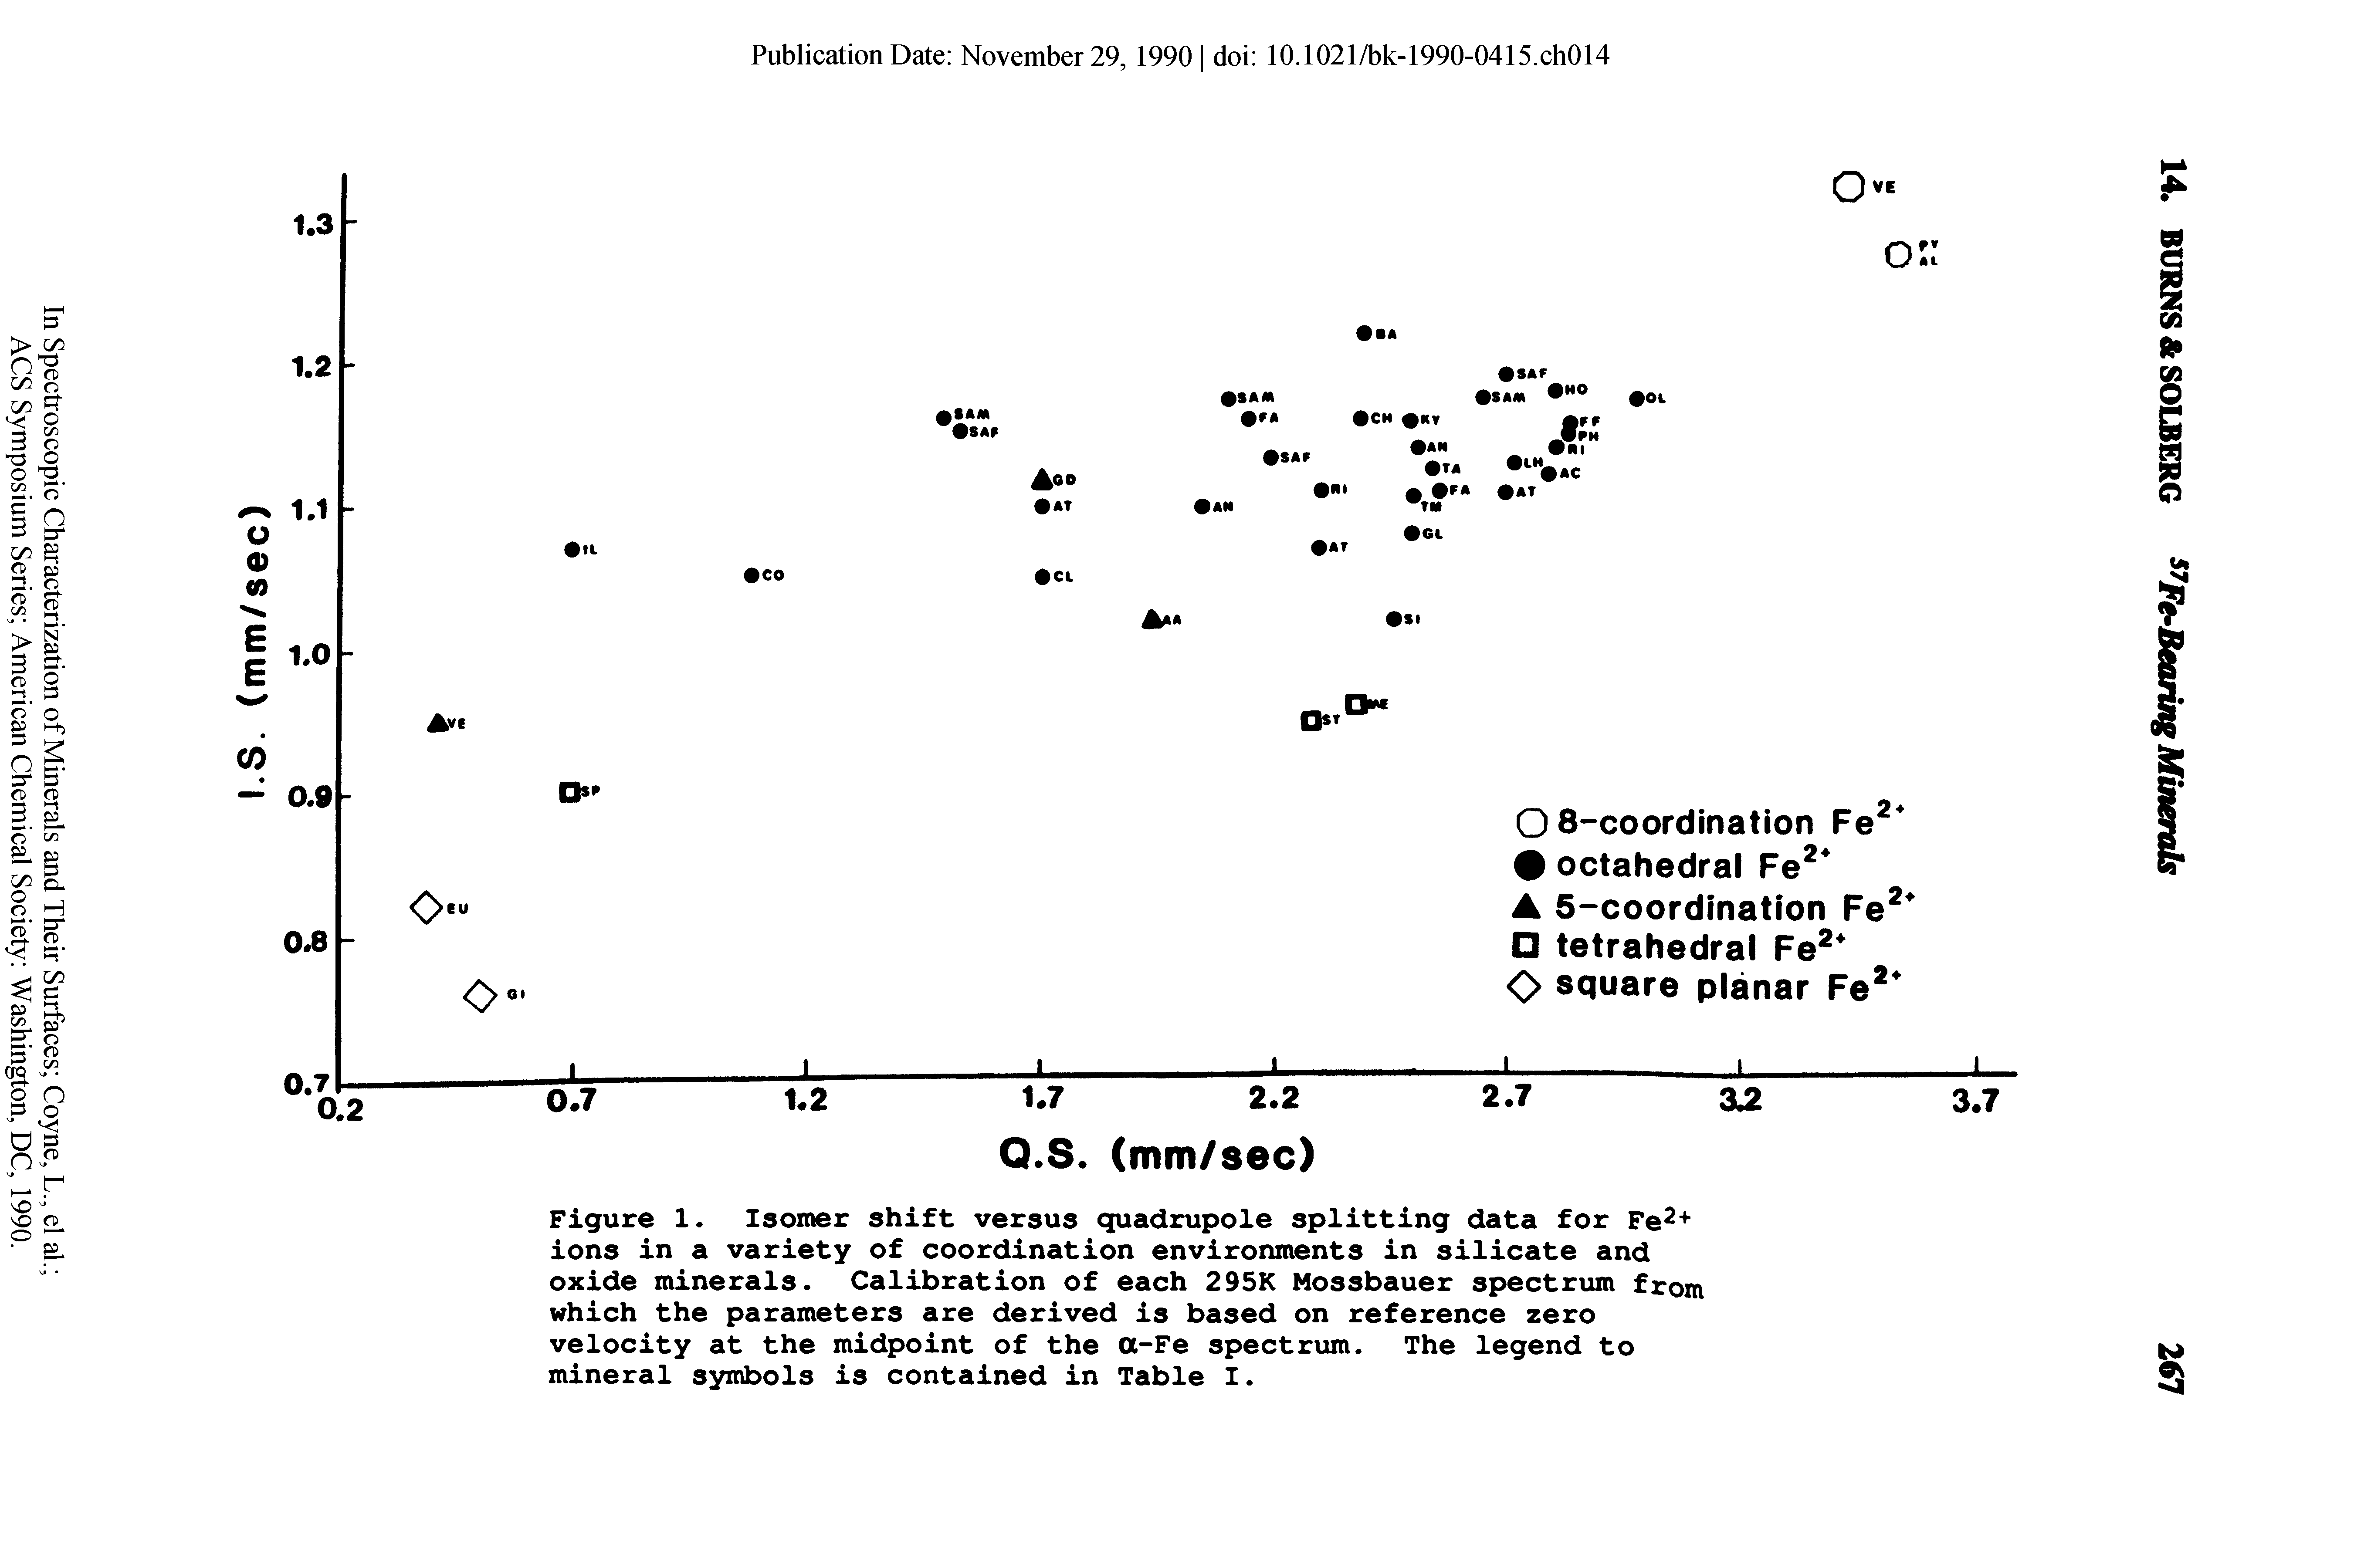 Figure 1. Isomer shift versus quadrupole splitting data for Fe2+ ions in a variety of coordination environments in silicate and oxide minerals. Calibration of each 295K Mossbauer spectrum from which the parameters are derived is based on reference zero velocity at the midpoint of the a-Fe spectrum. The legend to mineral symbols is contained in Table I.